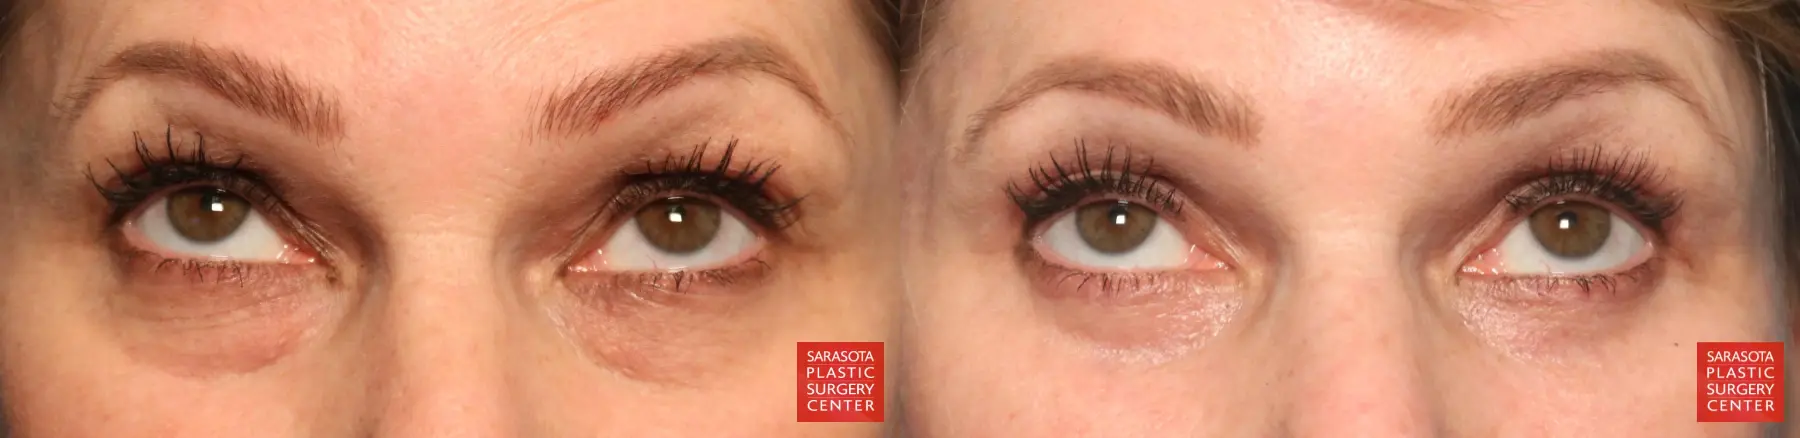 Eyelid Lift: Patient 52 - Before and After 2